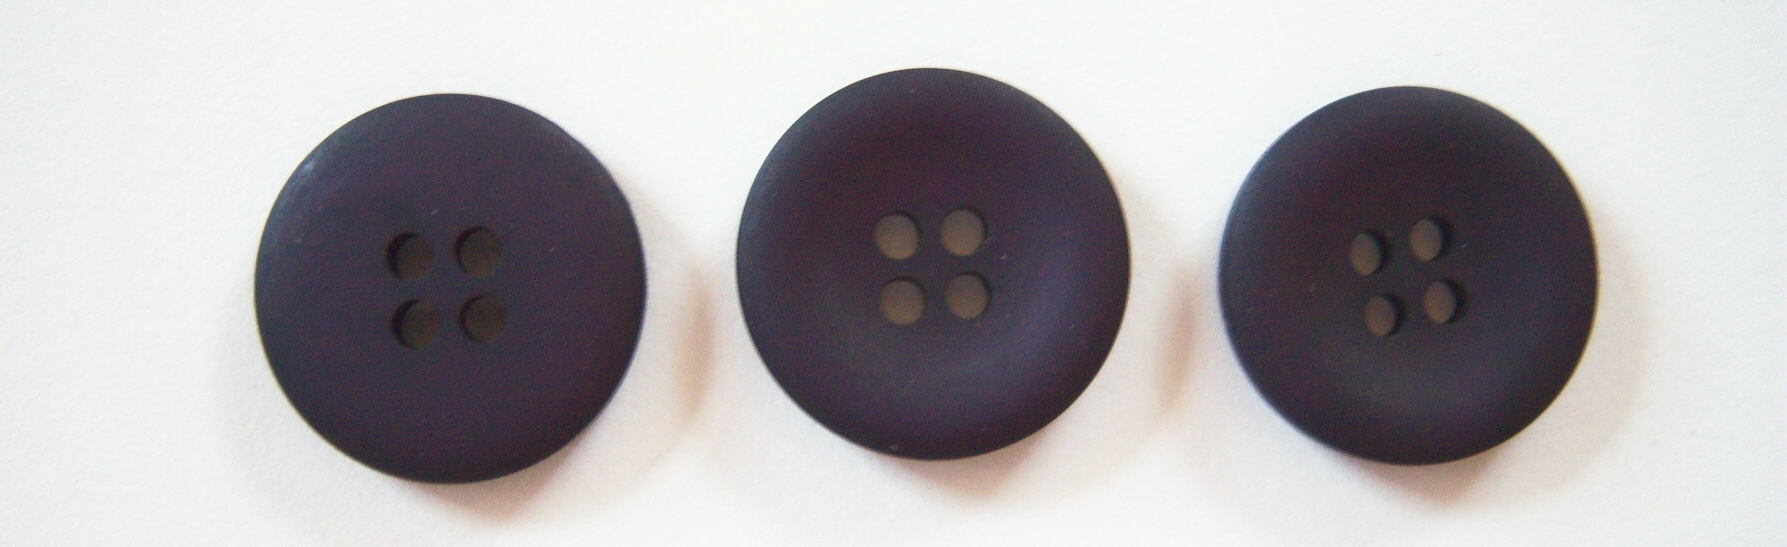 Plum Pearlized 3/4" 4 Hole Button